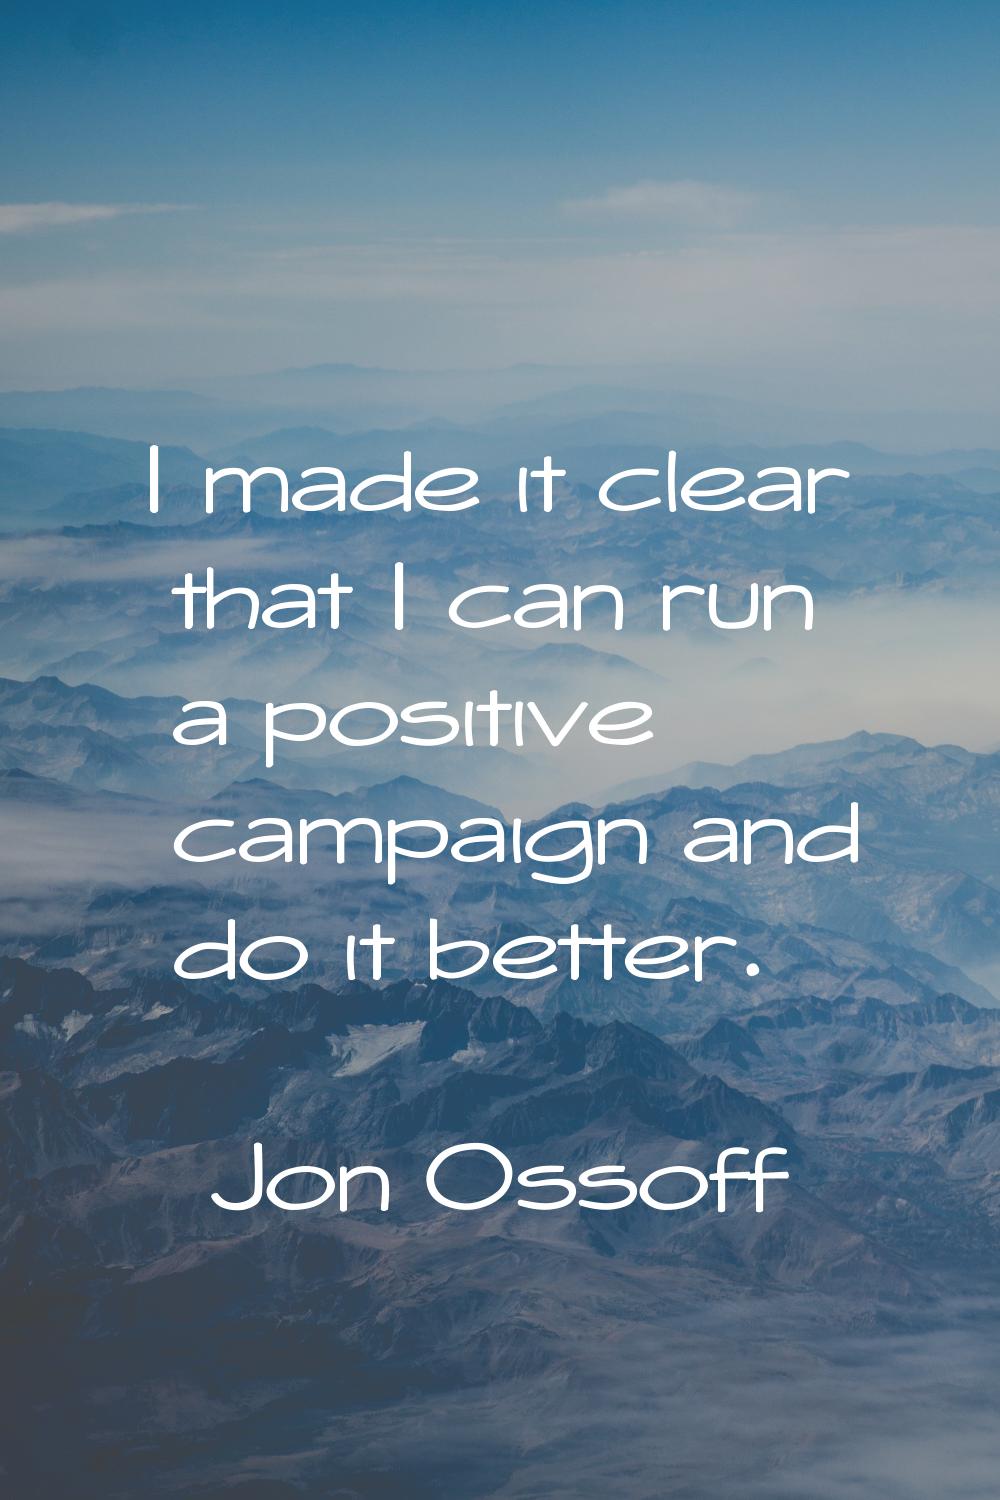 I made it clear that I can run a positive campaign and do it better.